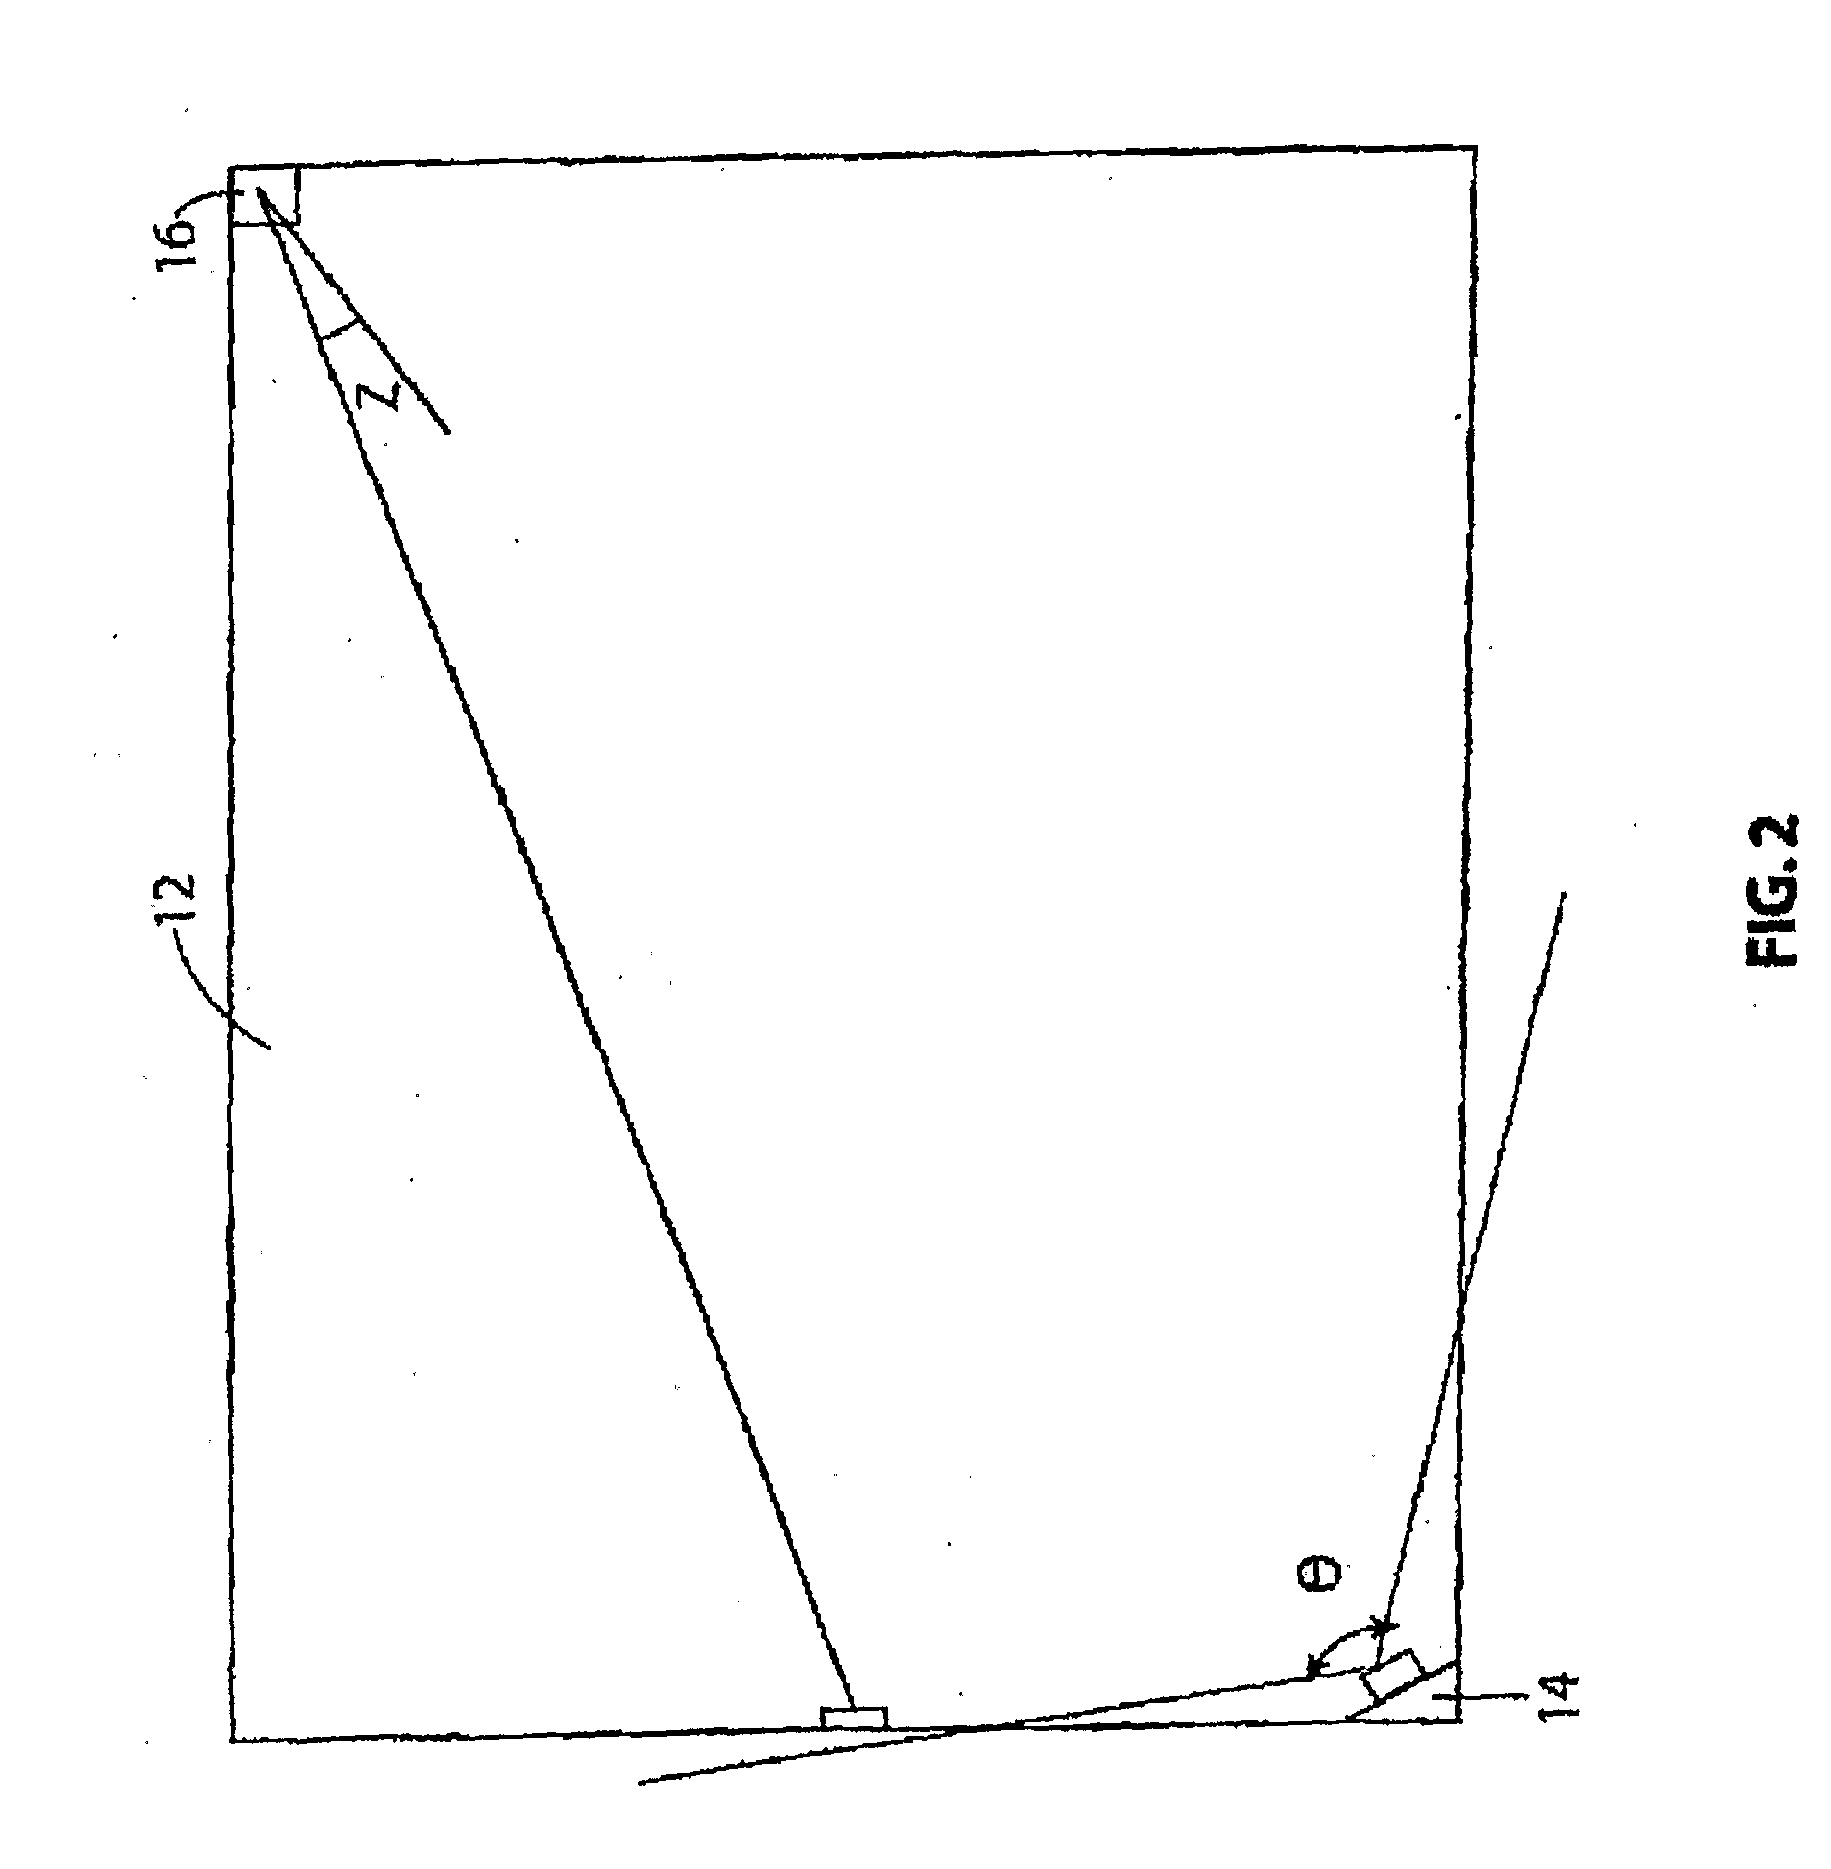 Particle Detector, System and Method